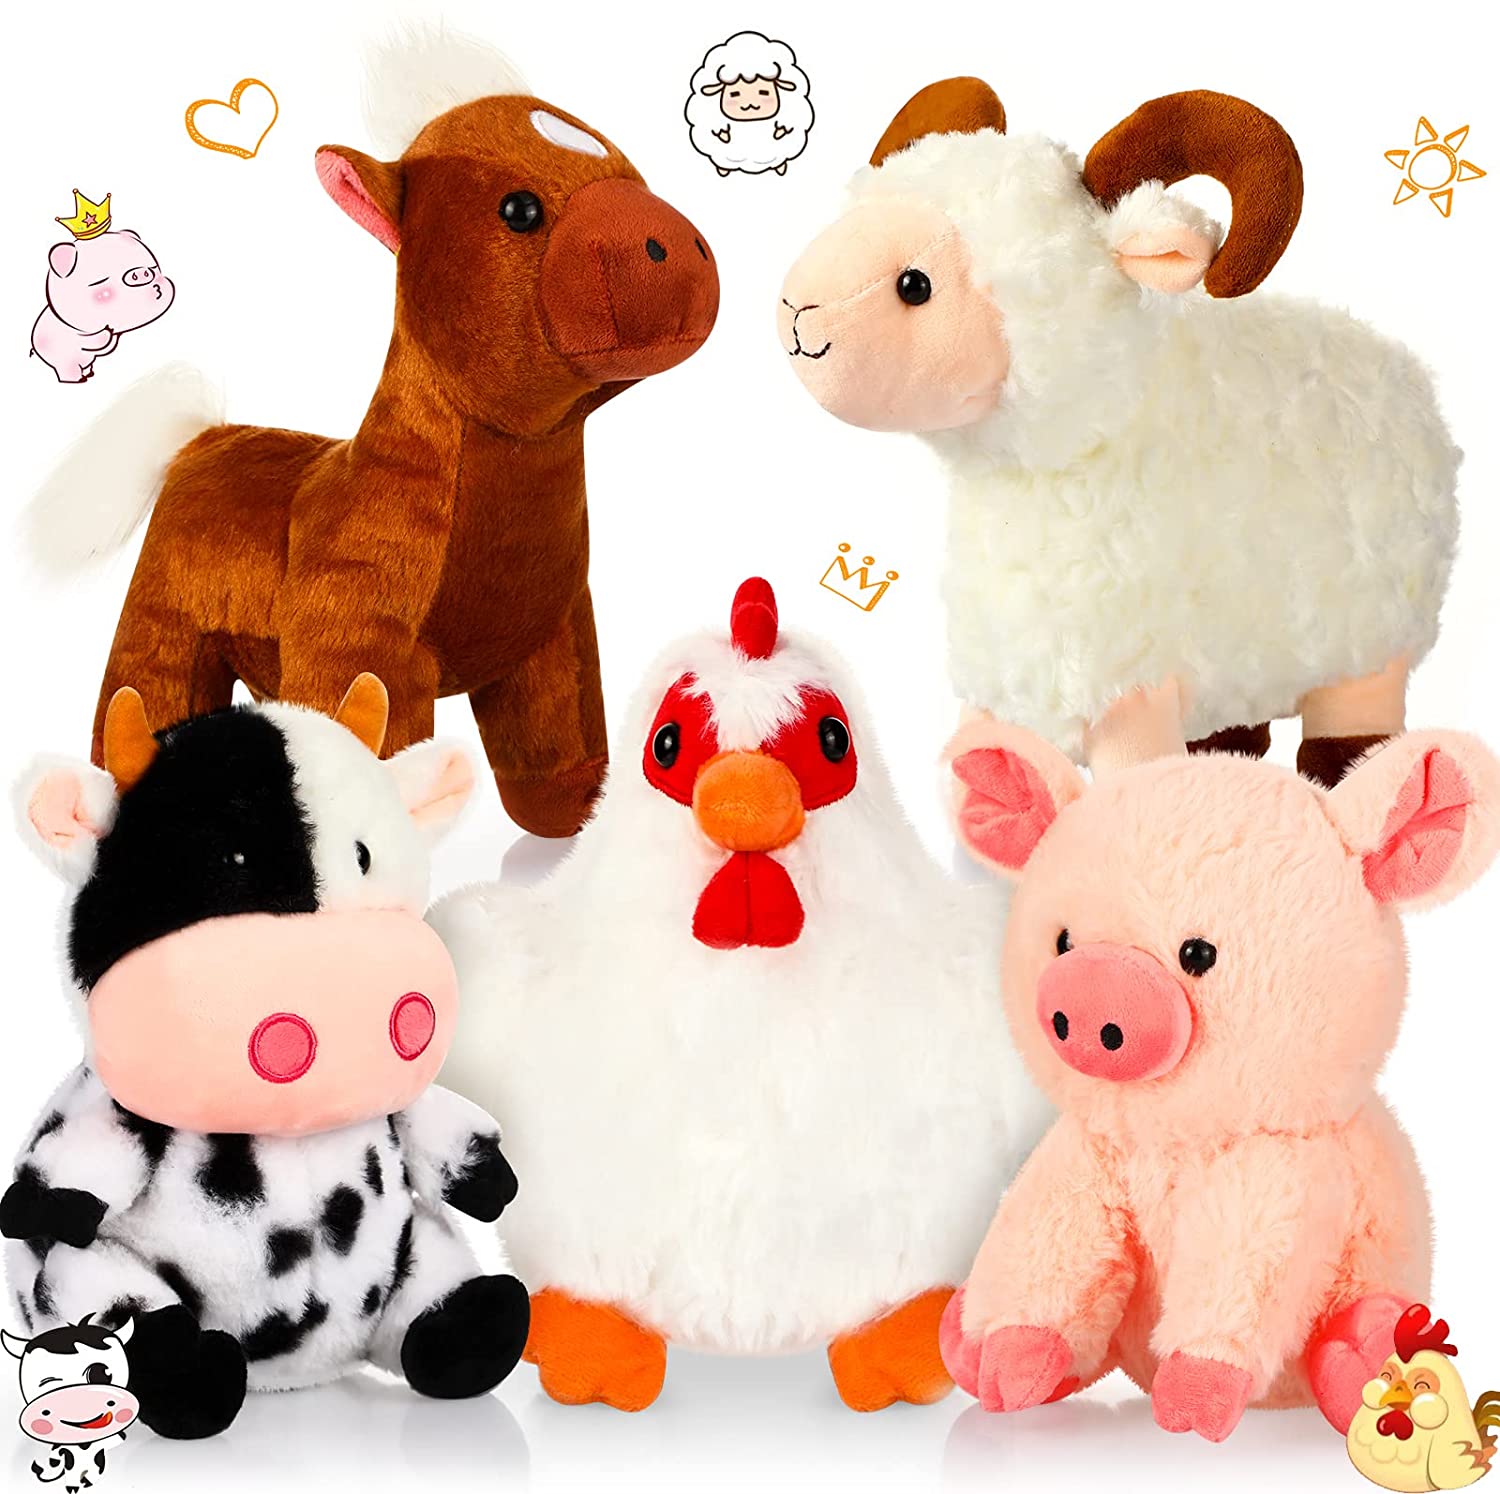 Details about   Kid's Soft Baby Farm Animal Toys Plush Cow Pig Horse Sheep Stuffed Toy Children 